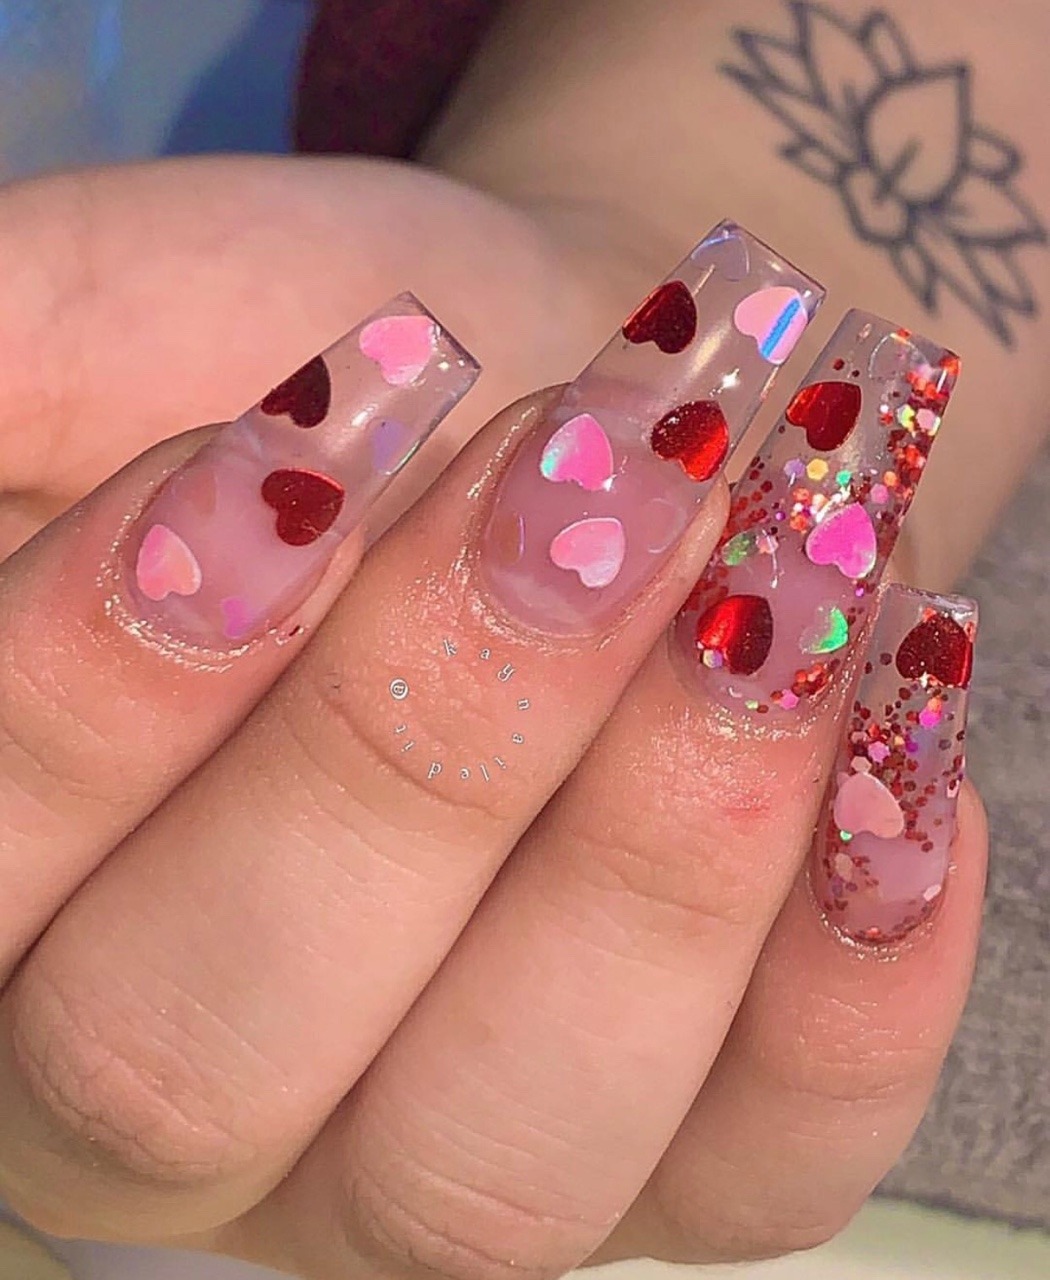 Ell West — Can't wait to get my nails done ☺️